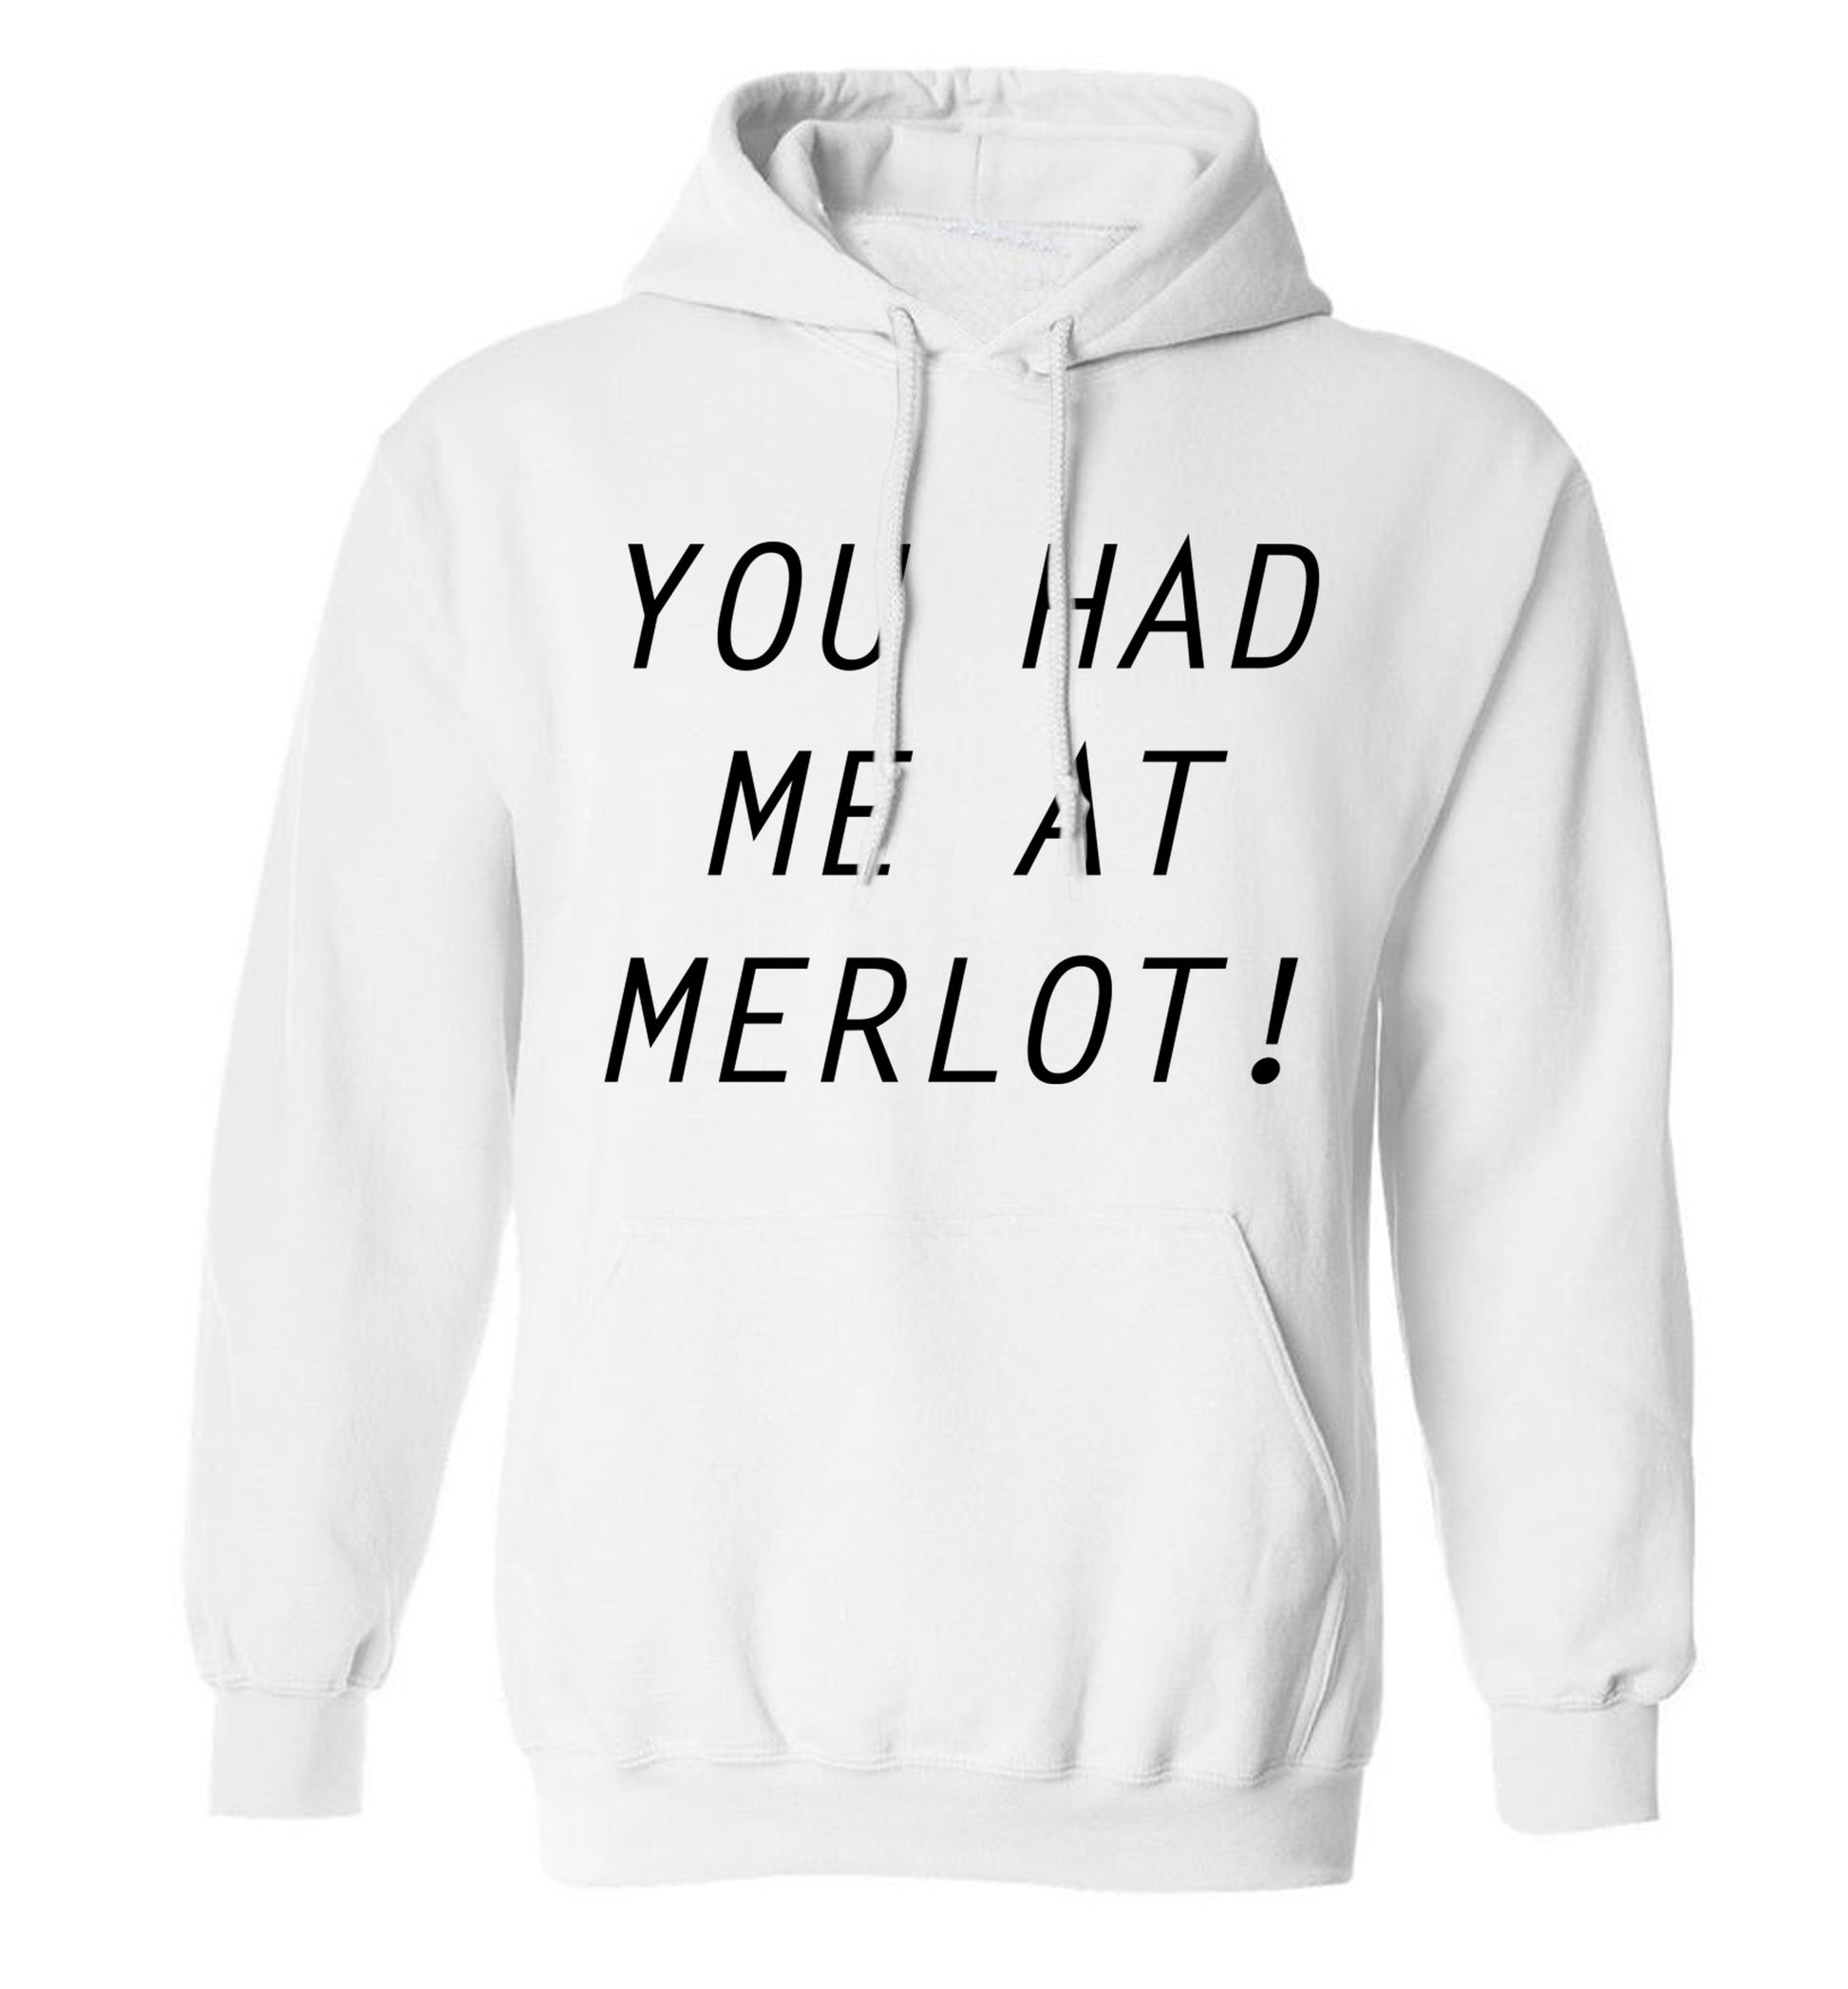 You had me at merlot adults unisex white hoodie 2XL